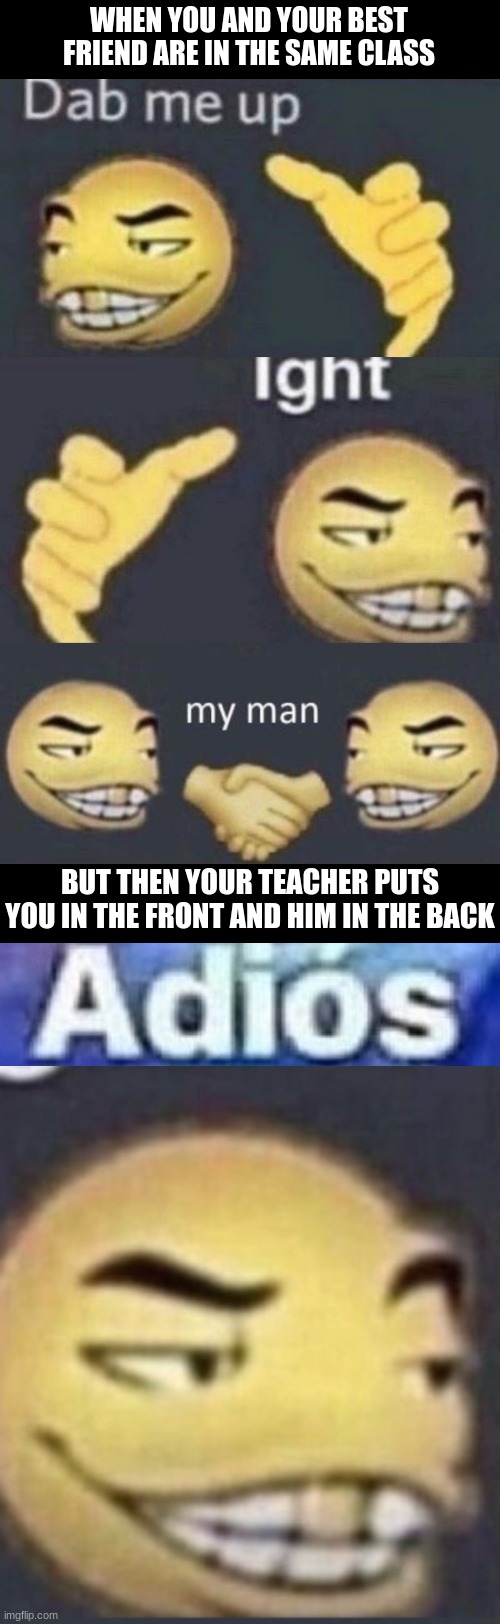 see ya my friend | WHEN YOU AND YOUR BEST FRIEND ARE IN THE SAME CLASS; BUT THEN YOUR TEACHER PUTS YOU IN THE FRONT AND HIM IN THE BACK | image tagged in dab me up ight my man,adios | made w/ Imgflip meme maker